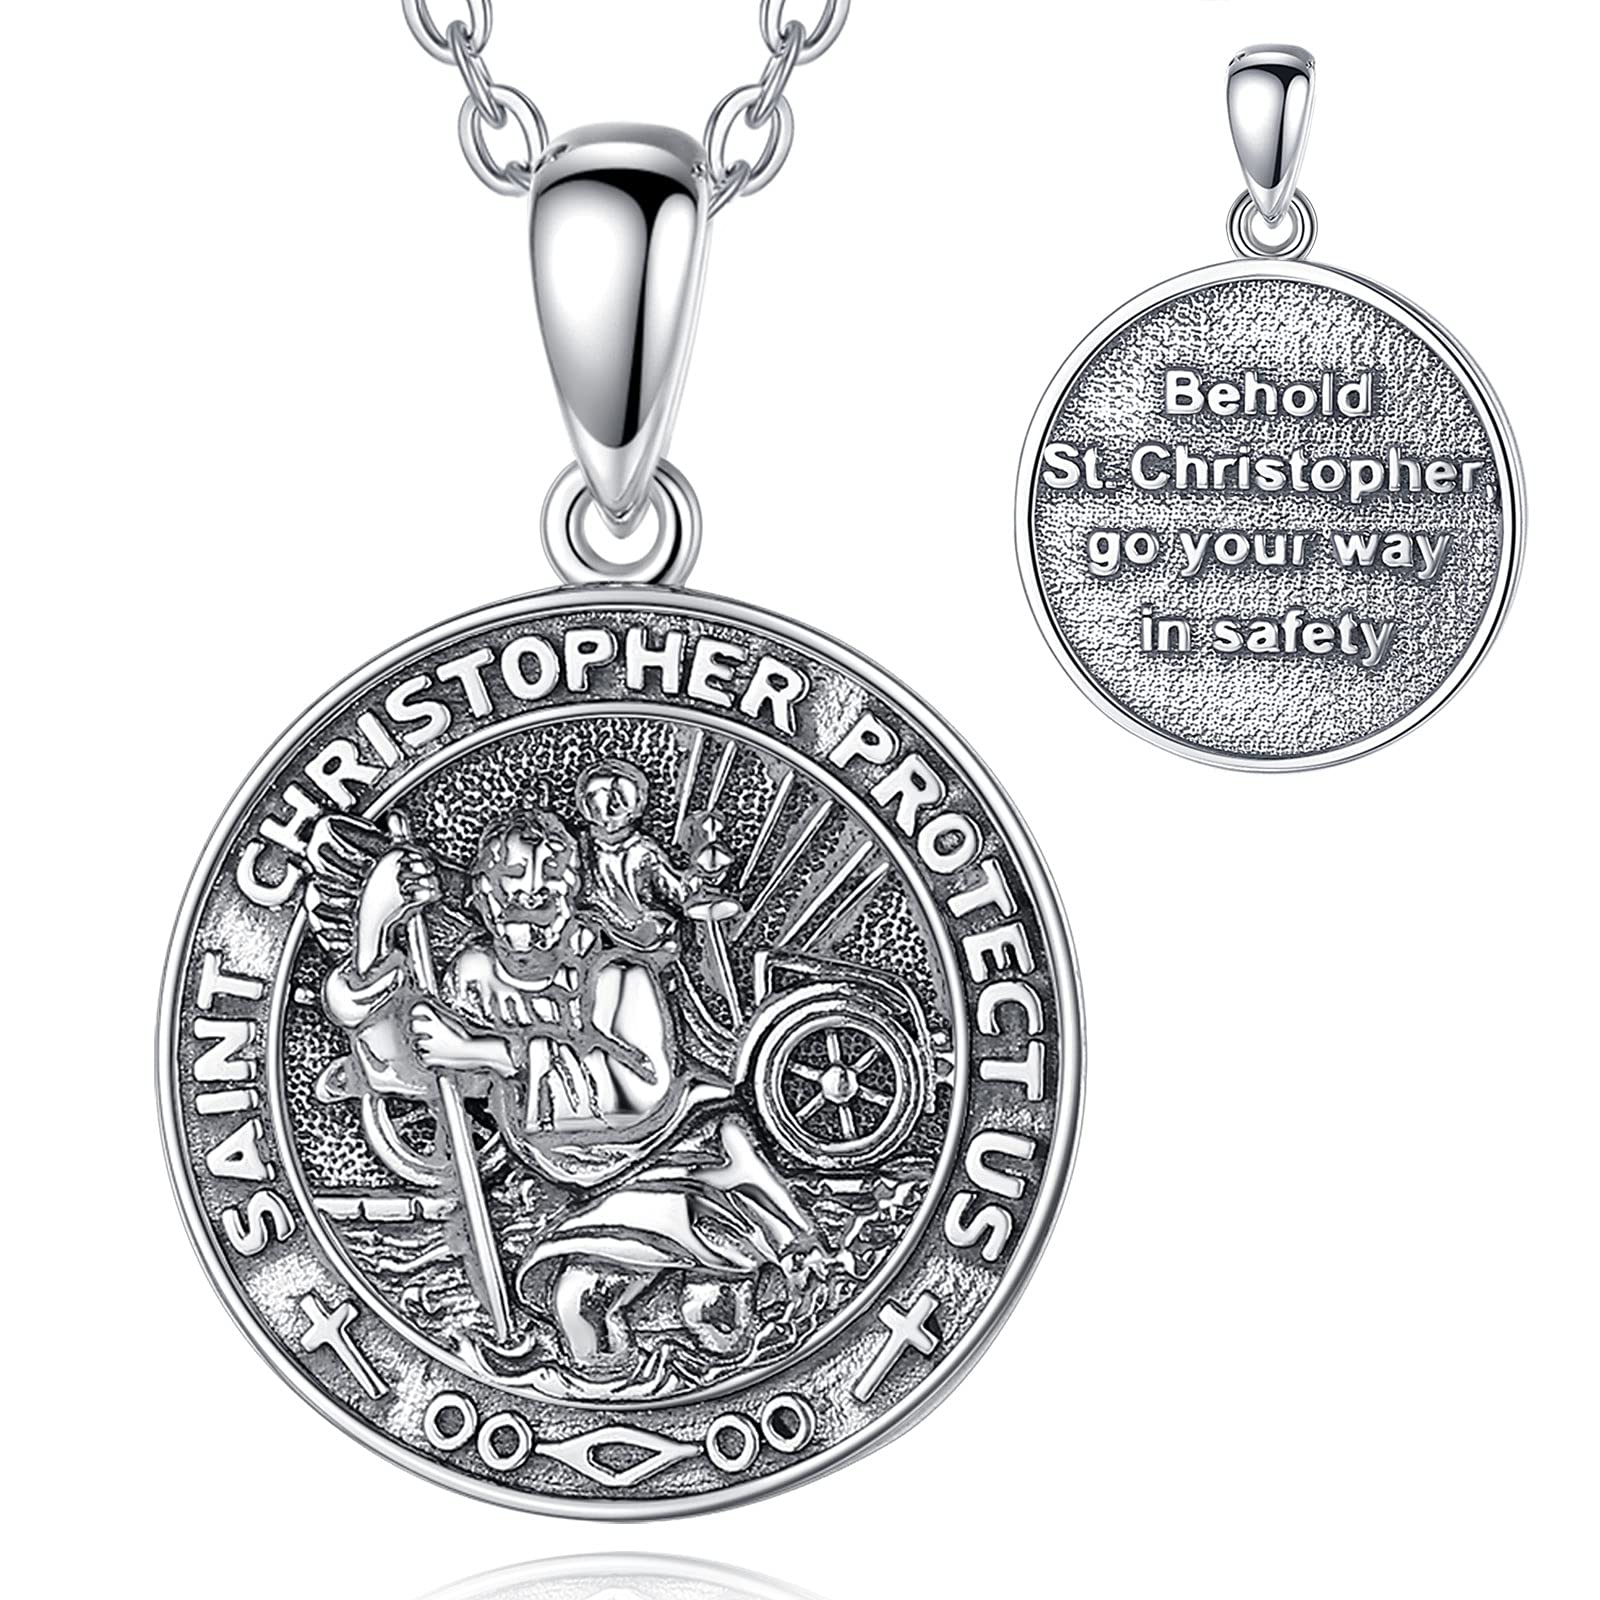 EUDORA ST Christopher Necklace for Men Silver Pendant 925 Sterling Silver Necklace for Men Women, Good Luck Amulet Necklace for Man Women Couple Jewellery, 24 inches Chain